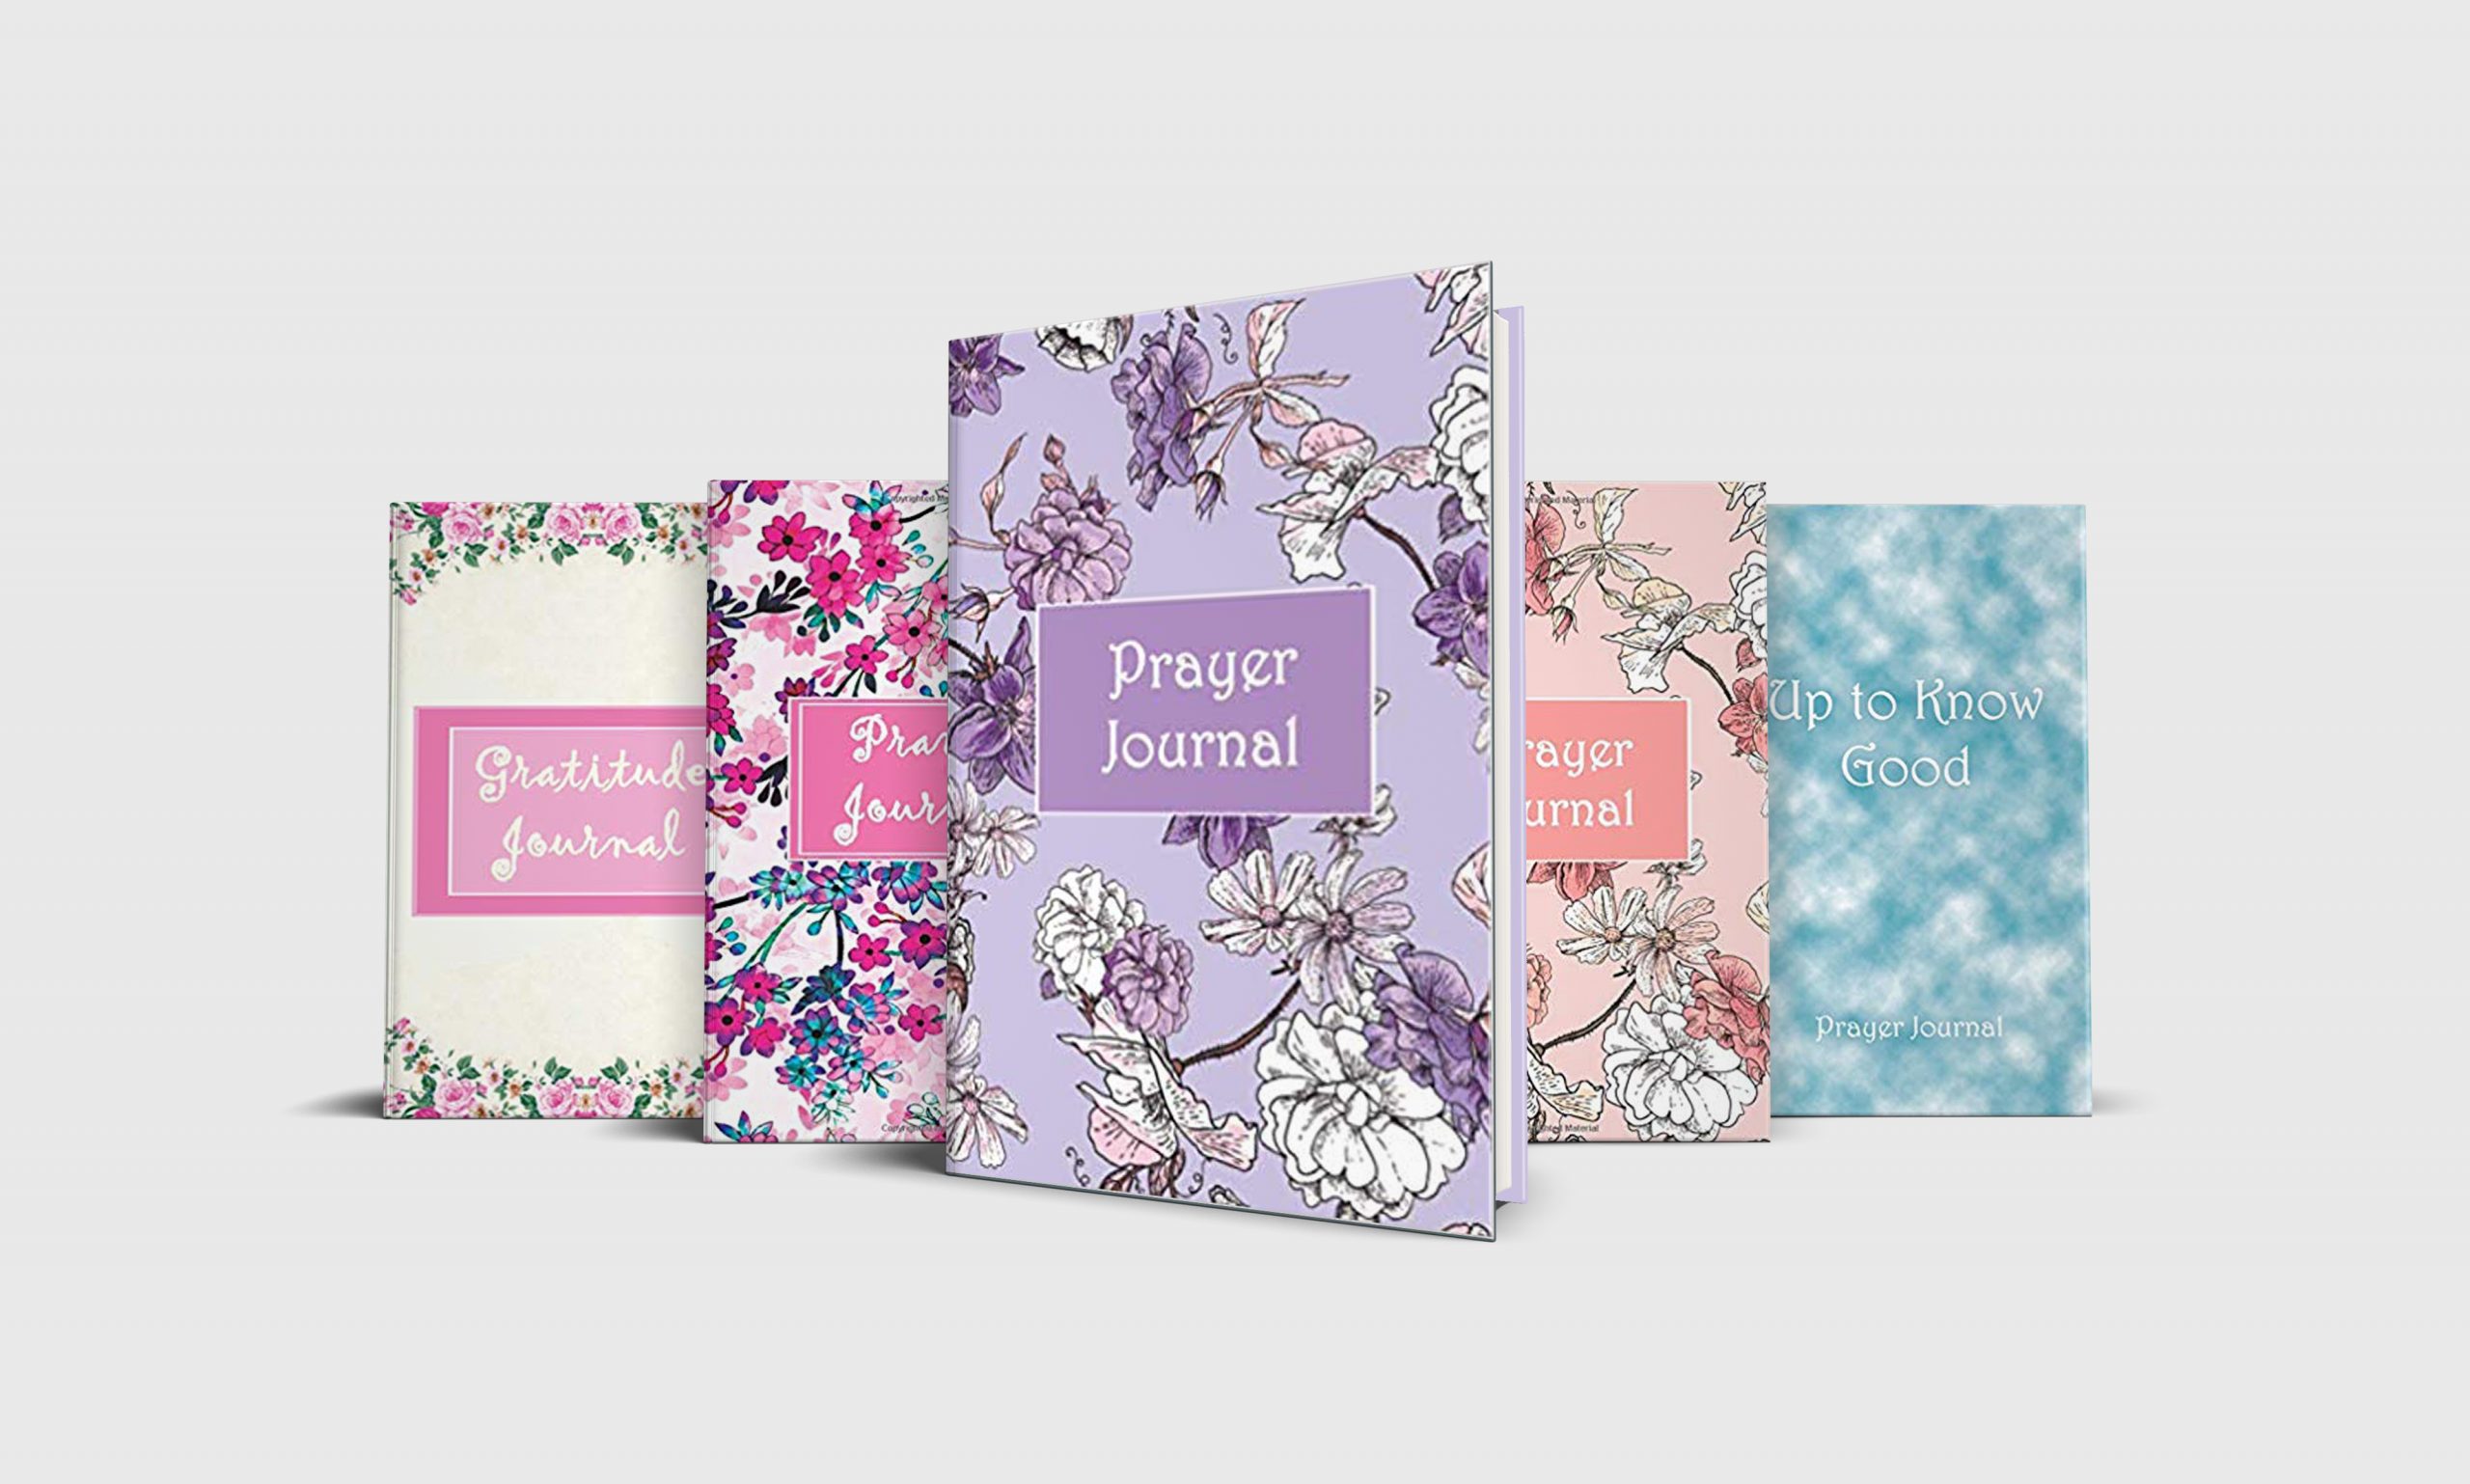 Prayer and Gratitude journals from Premise Content.